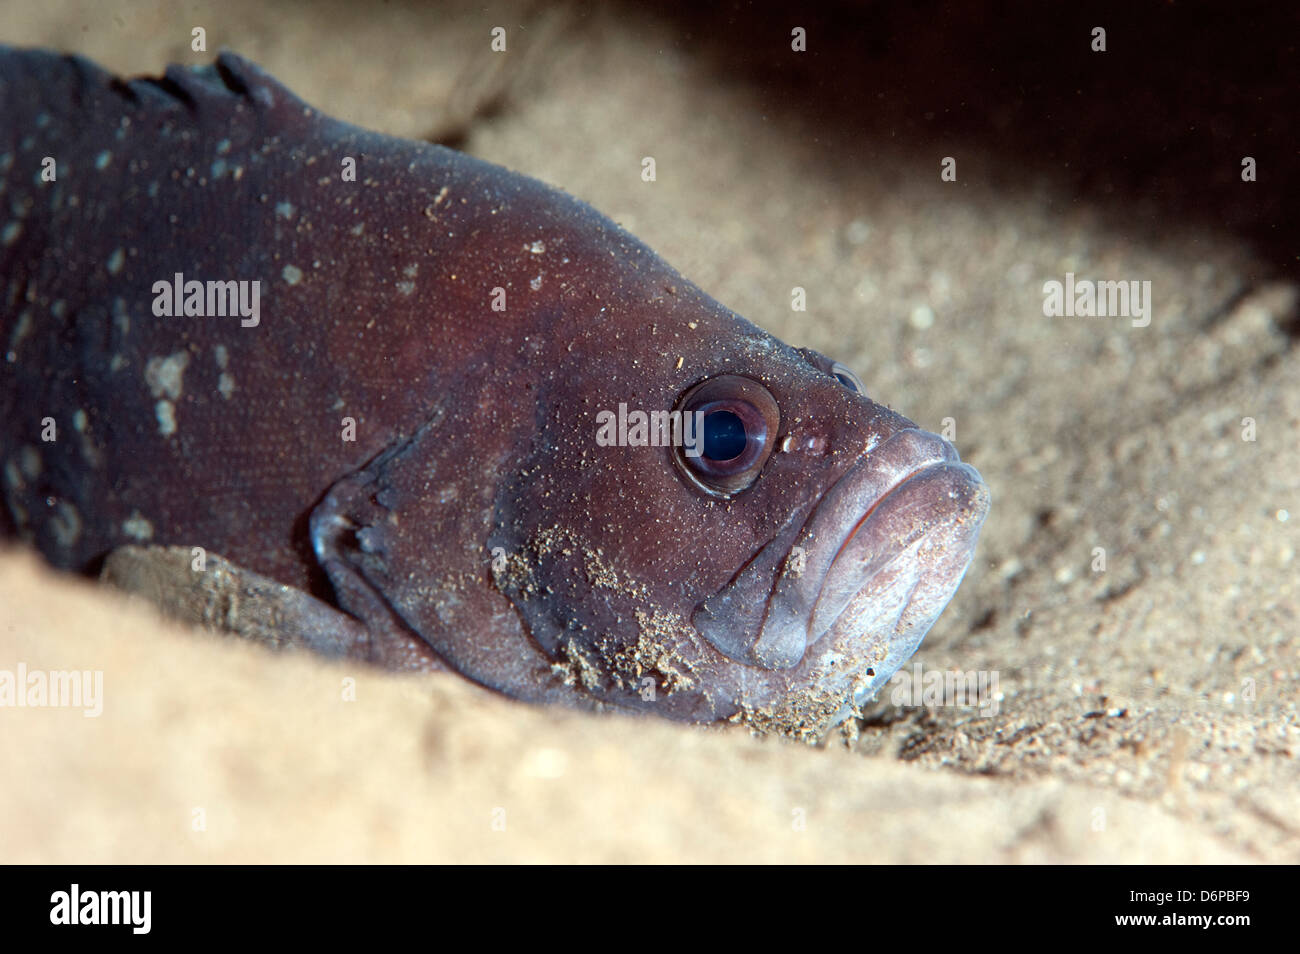 Whitespotted soapfish (Rypticus maculatus), Dominica, West Indies, Caribbean, Central America Stock Photo